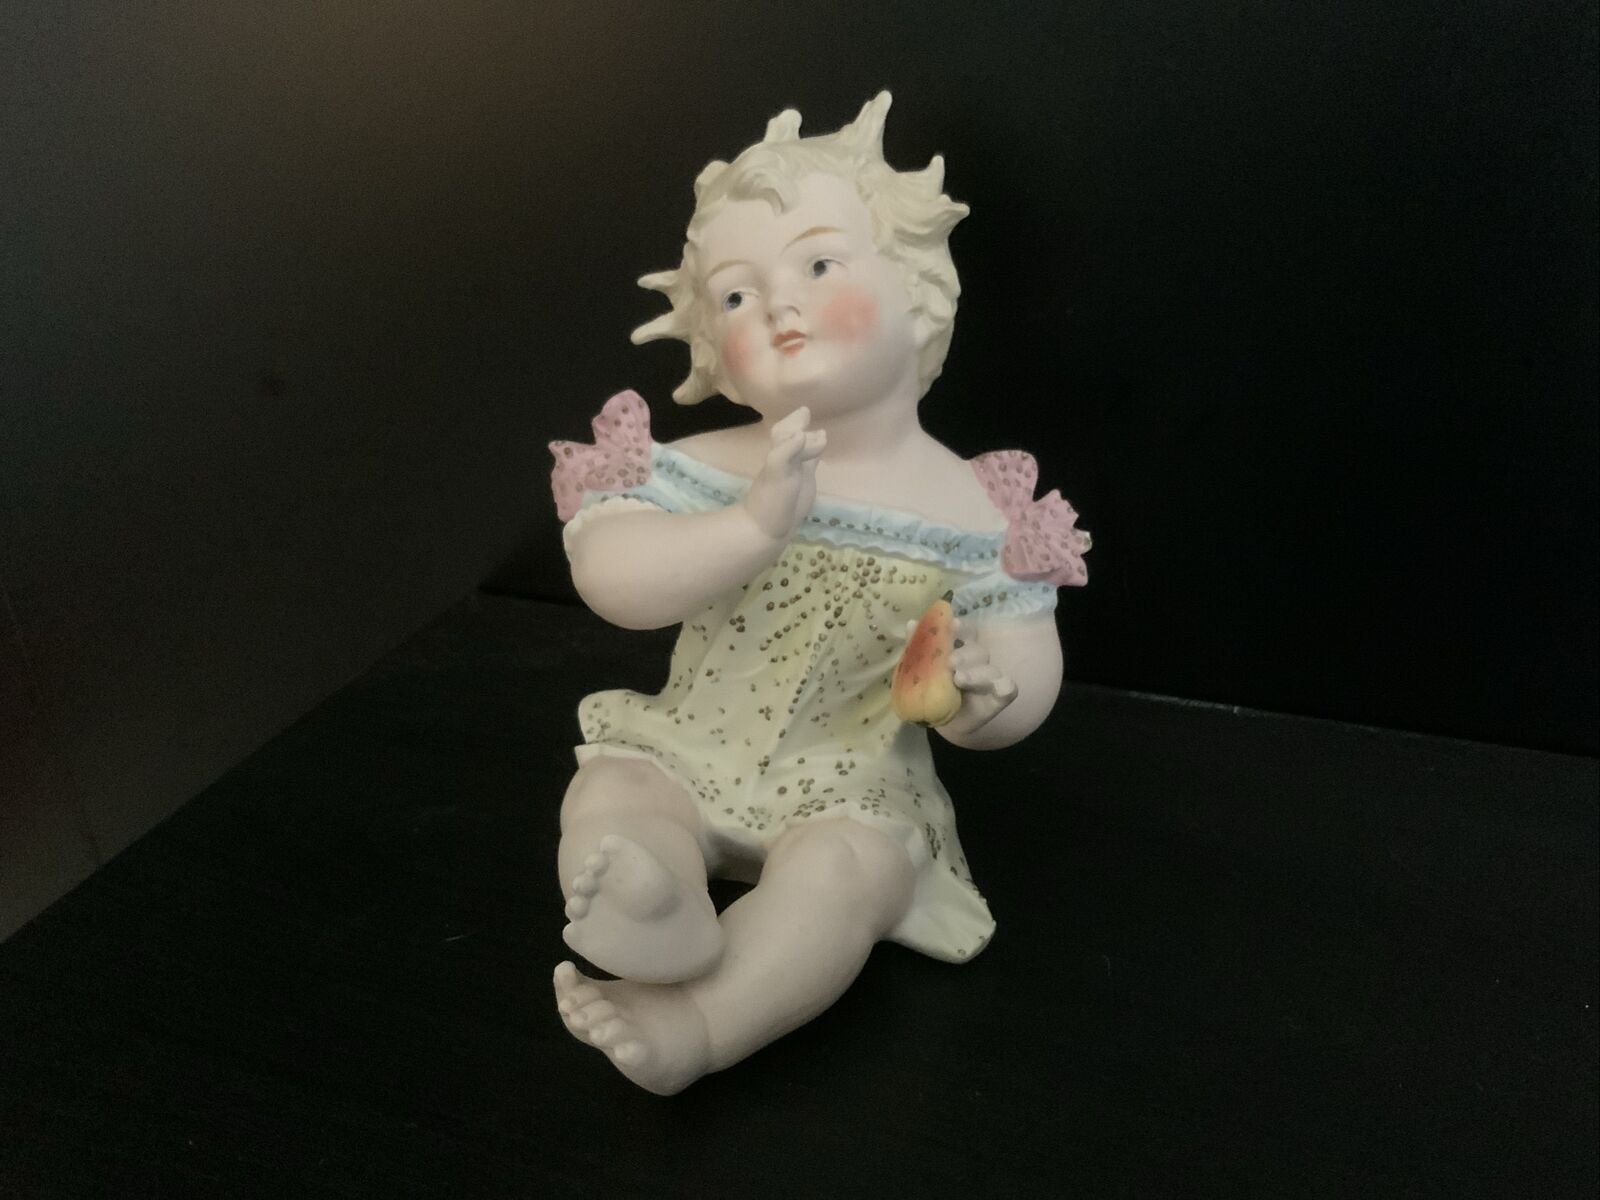 ANTIQUE LARGE PORCELAIN BISQUE PIANO BABY HOLDING PEAR, CONTA BOEHME, 8 INCHES